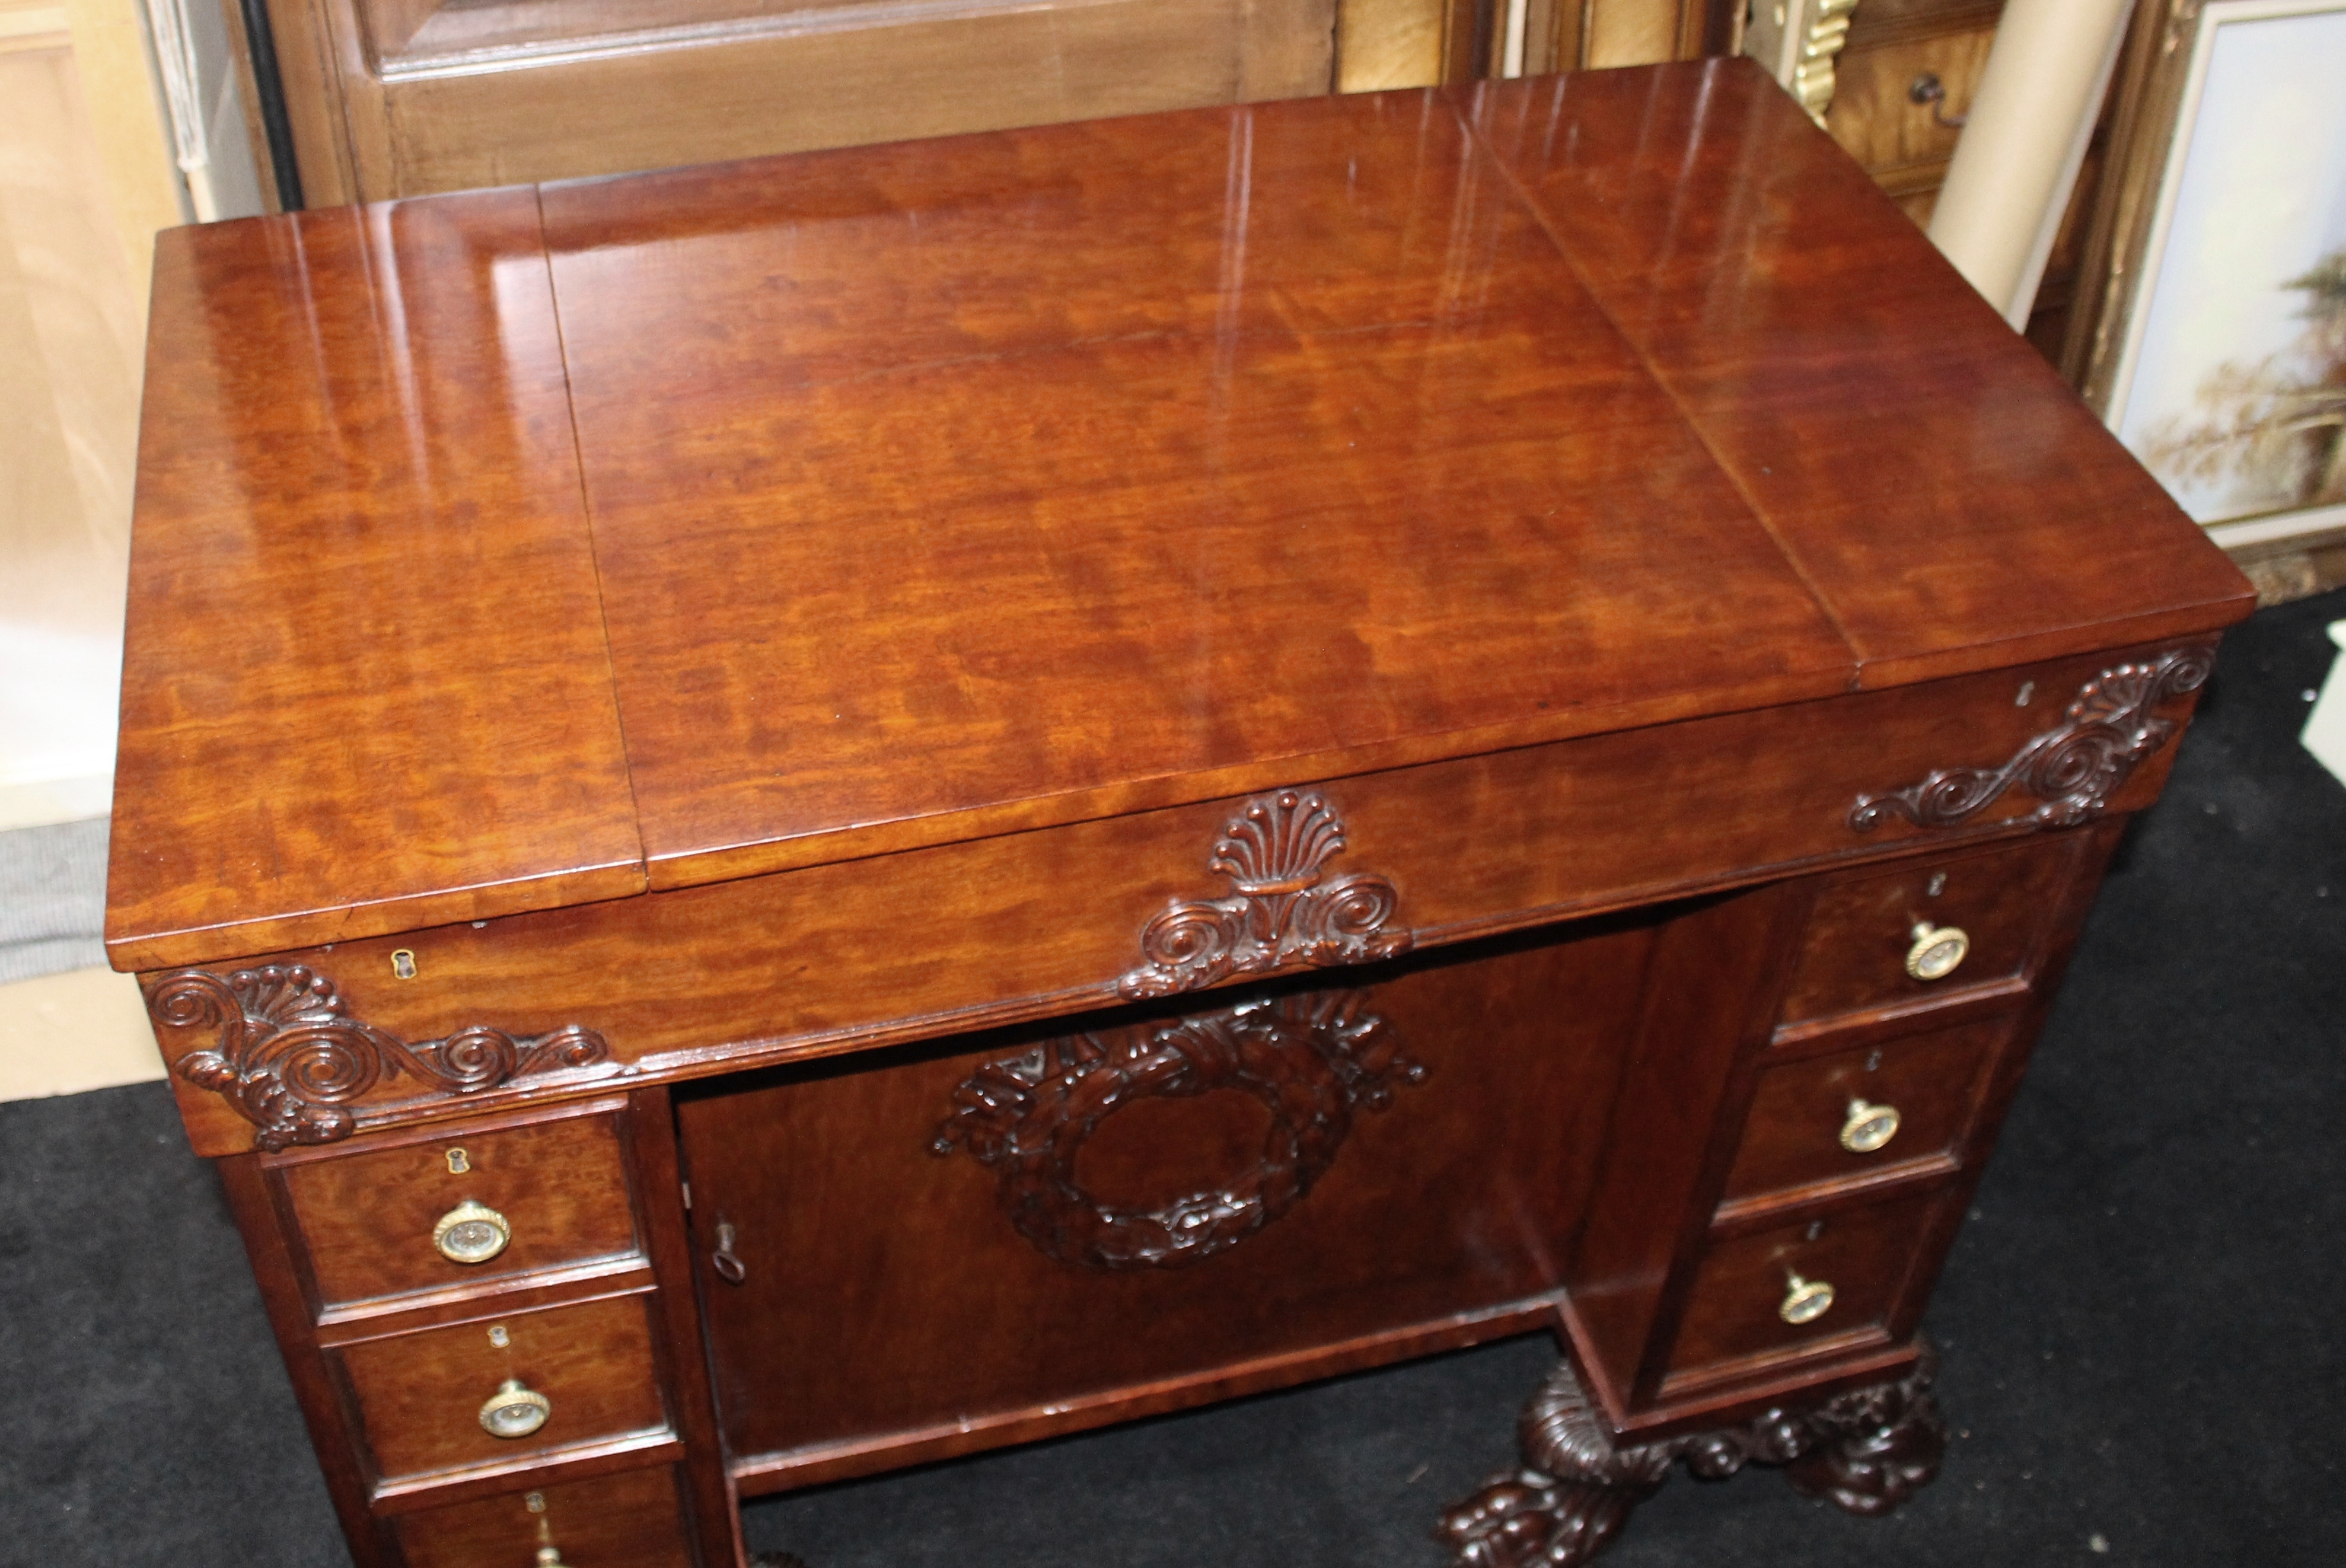 Fine Late 18th c. Mahogany Desk with Carved Feet - Image 5 of 8